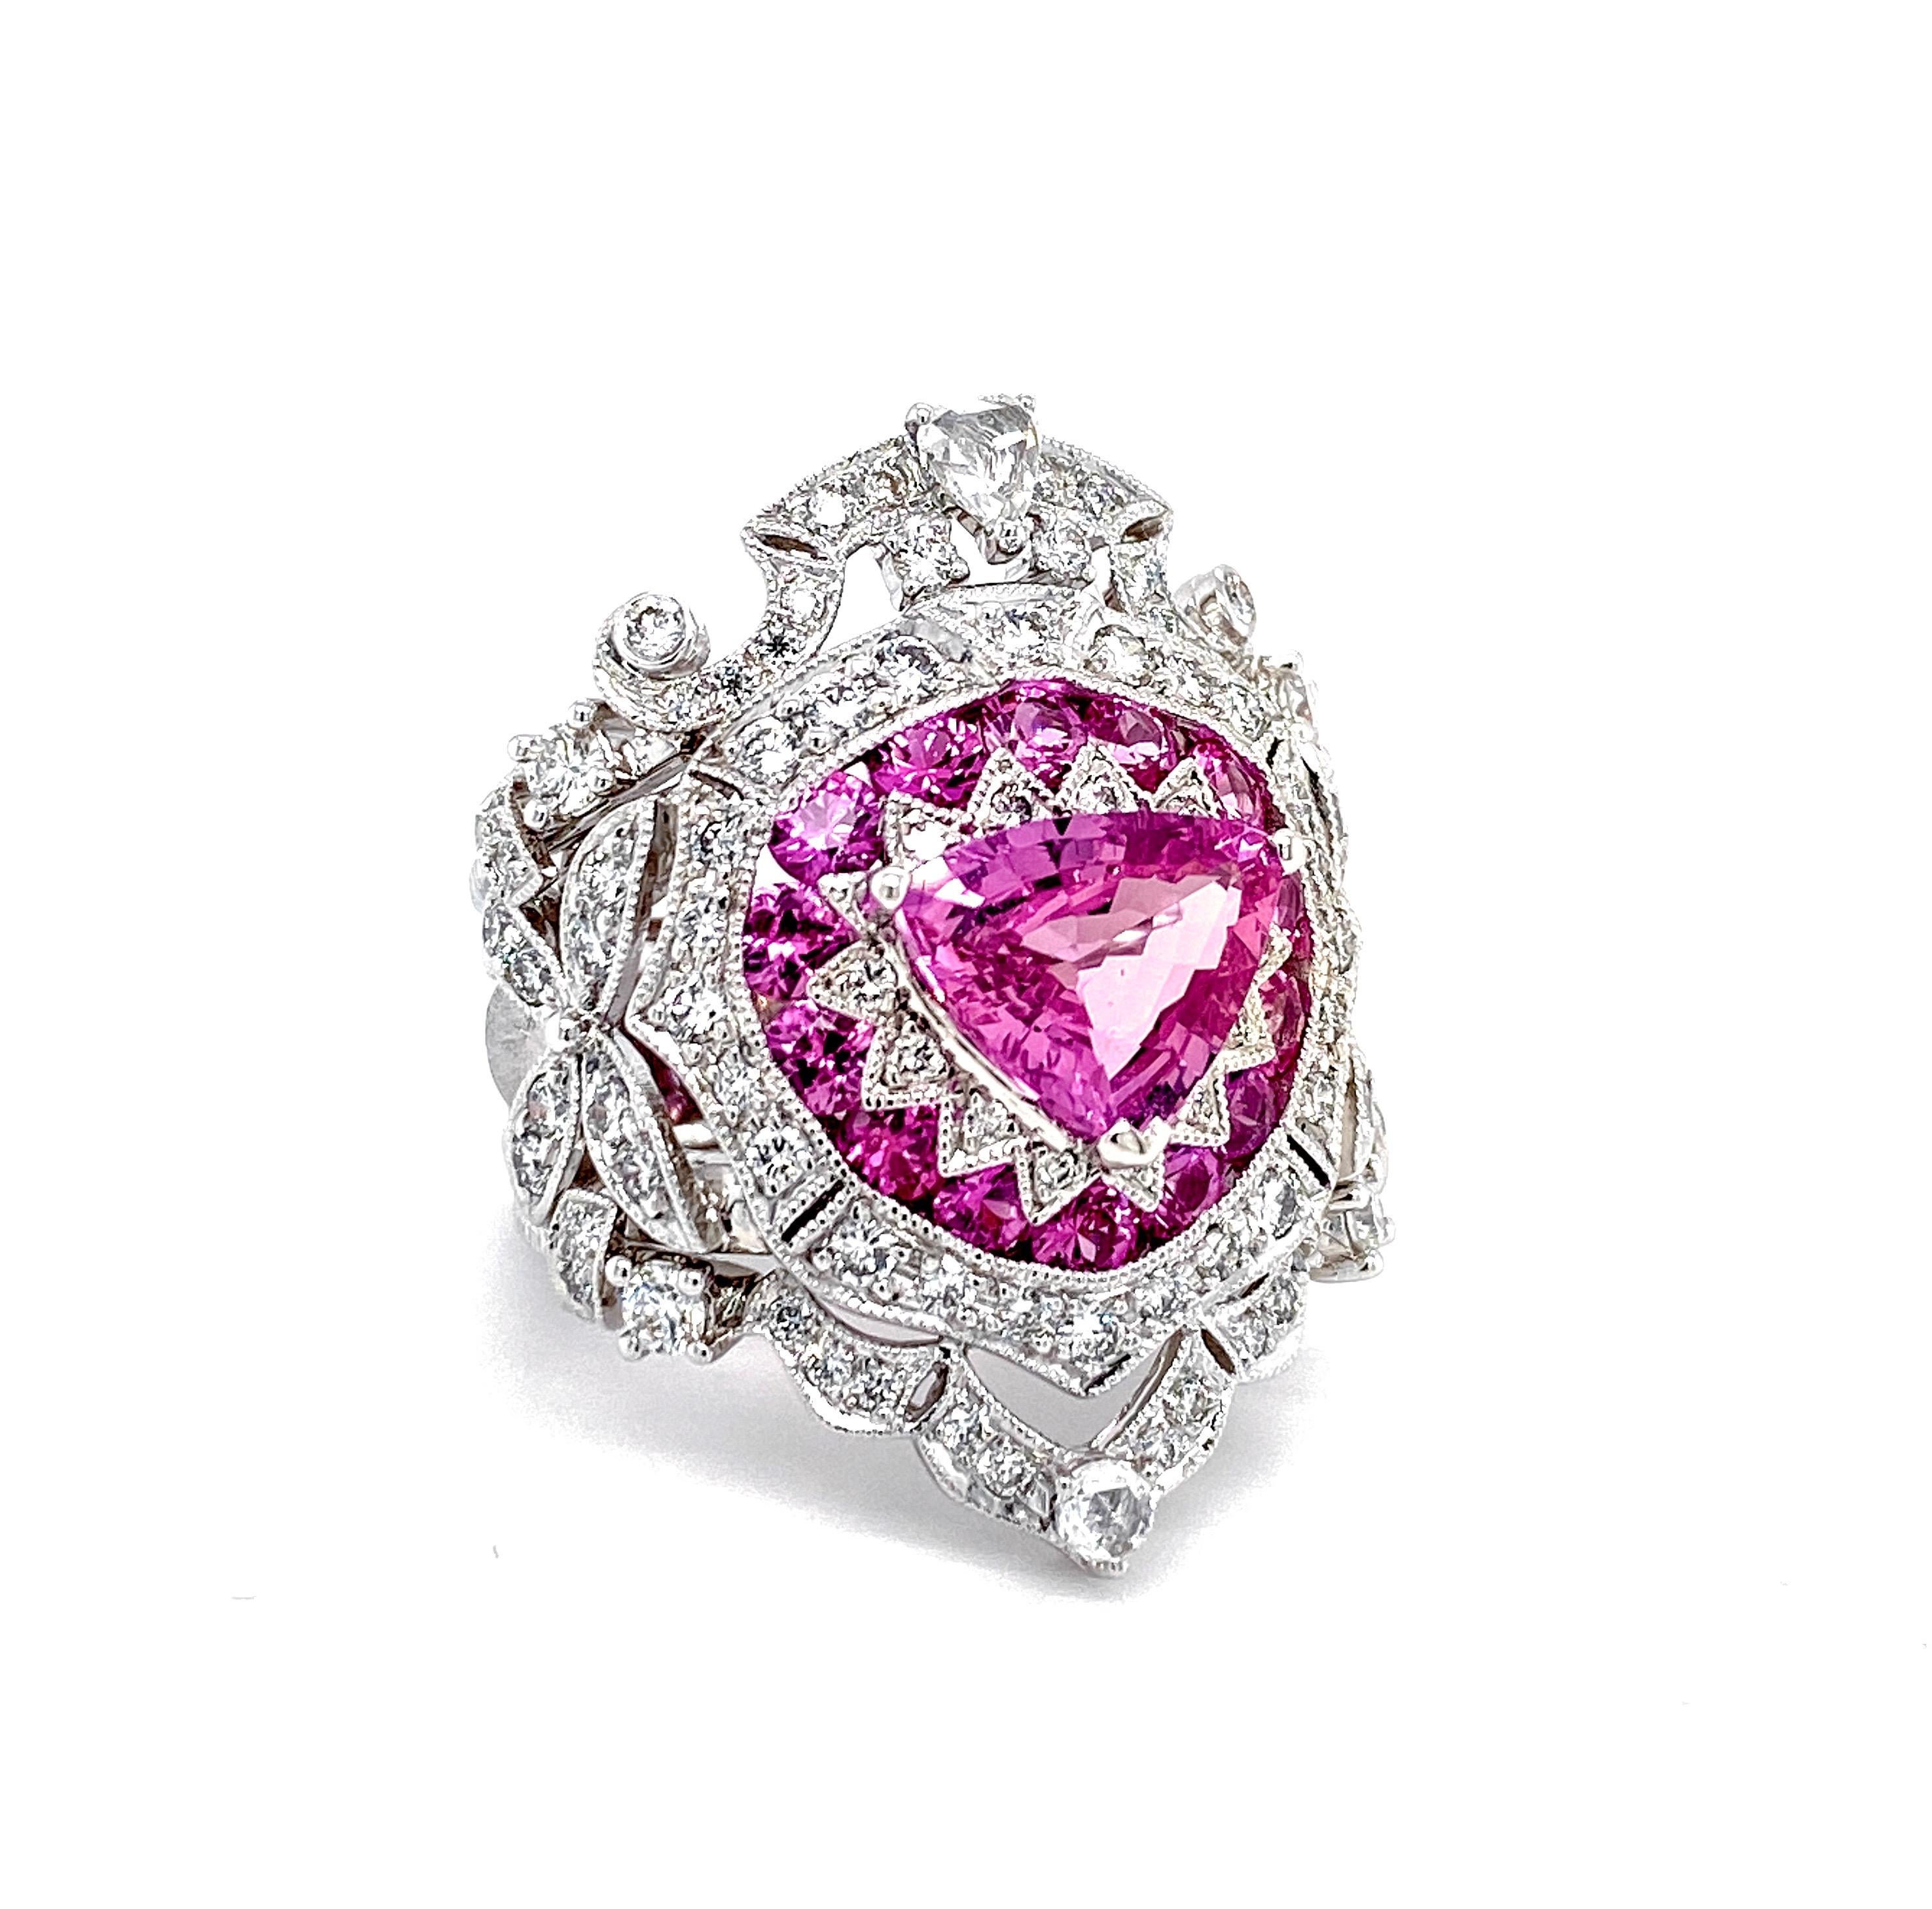 Trillion Cut Art Deco Inspired Pink Sapphire and Diamond Ring in 18 Karat White Gold